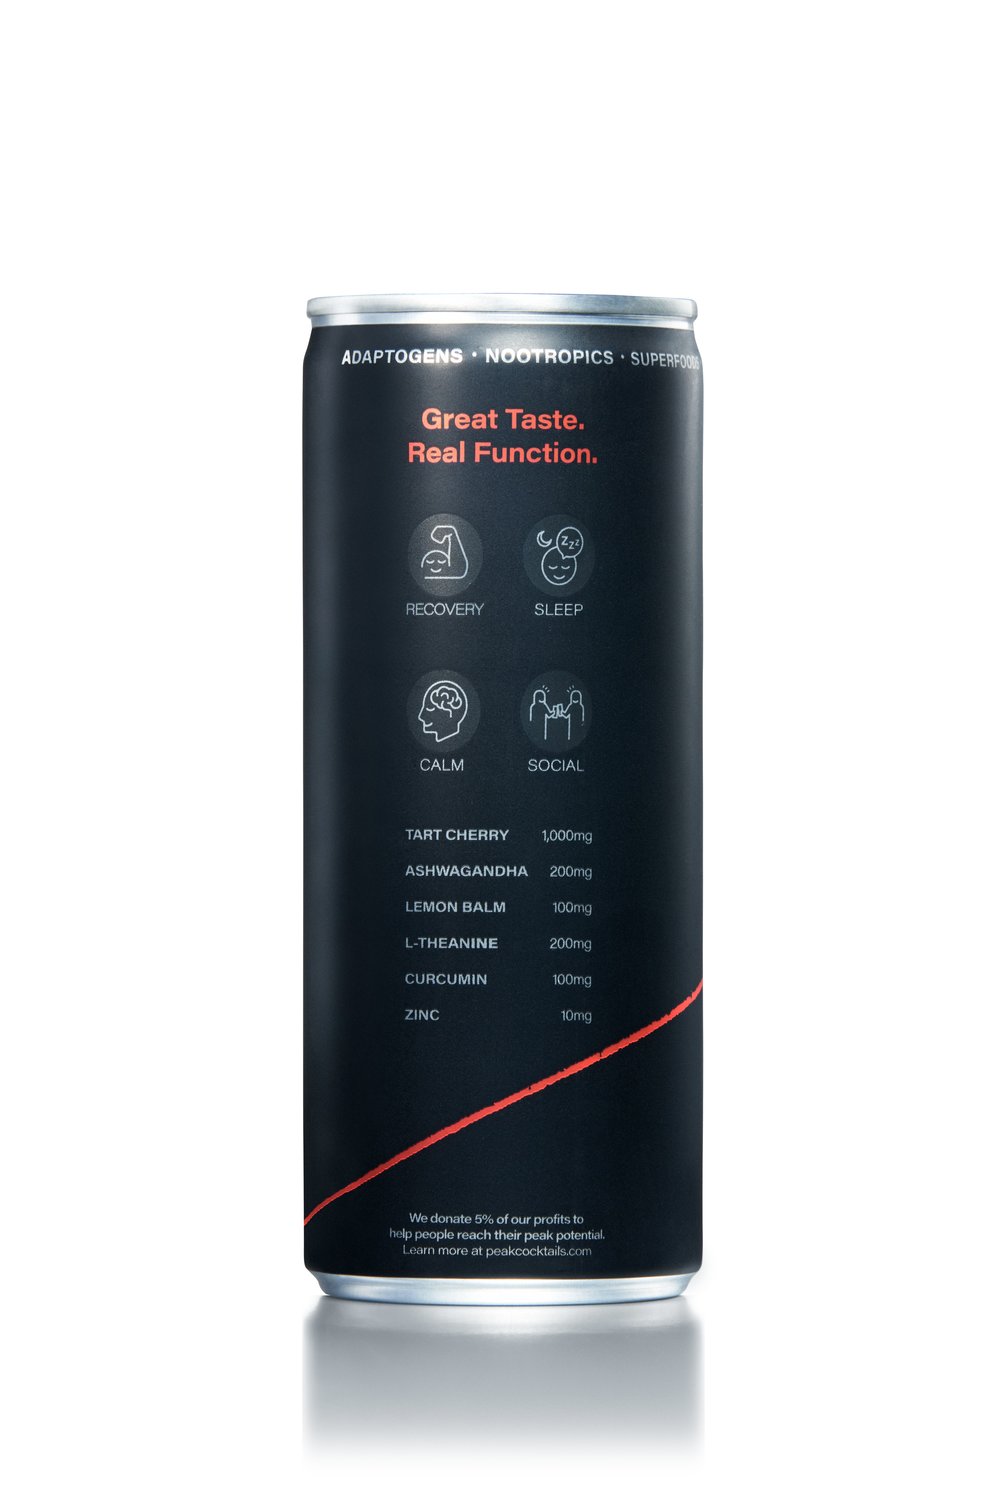 Back of can showing benefits and functional ingredients